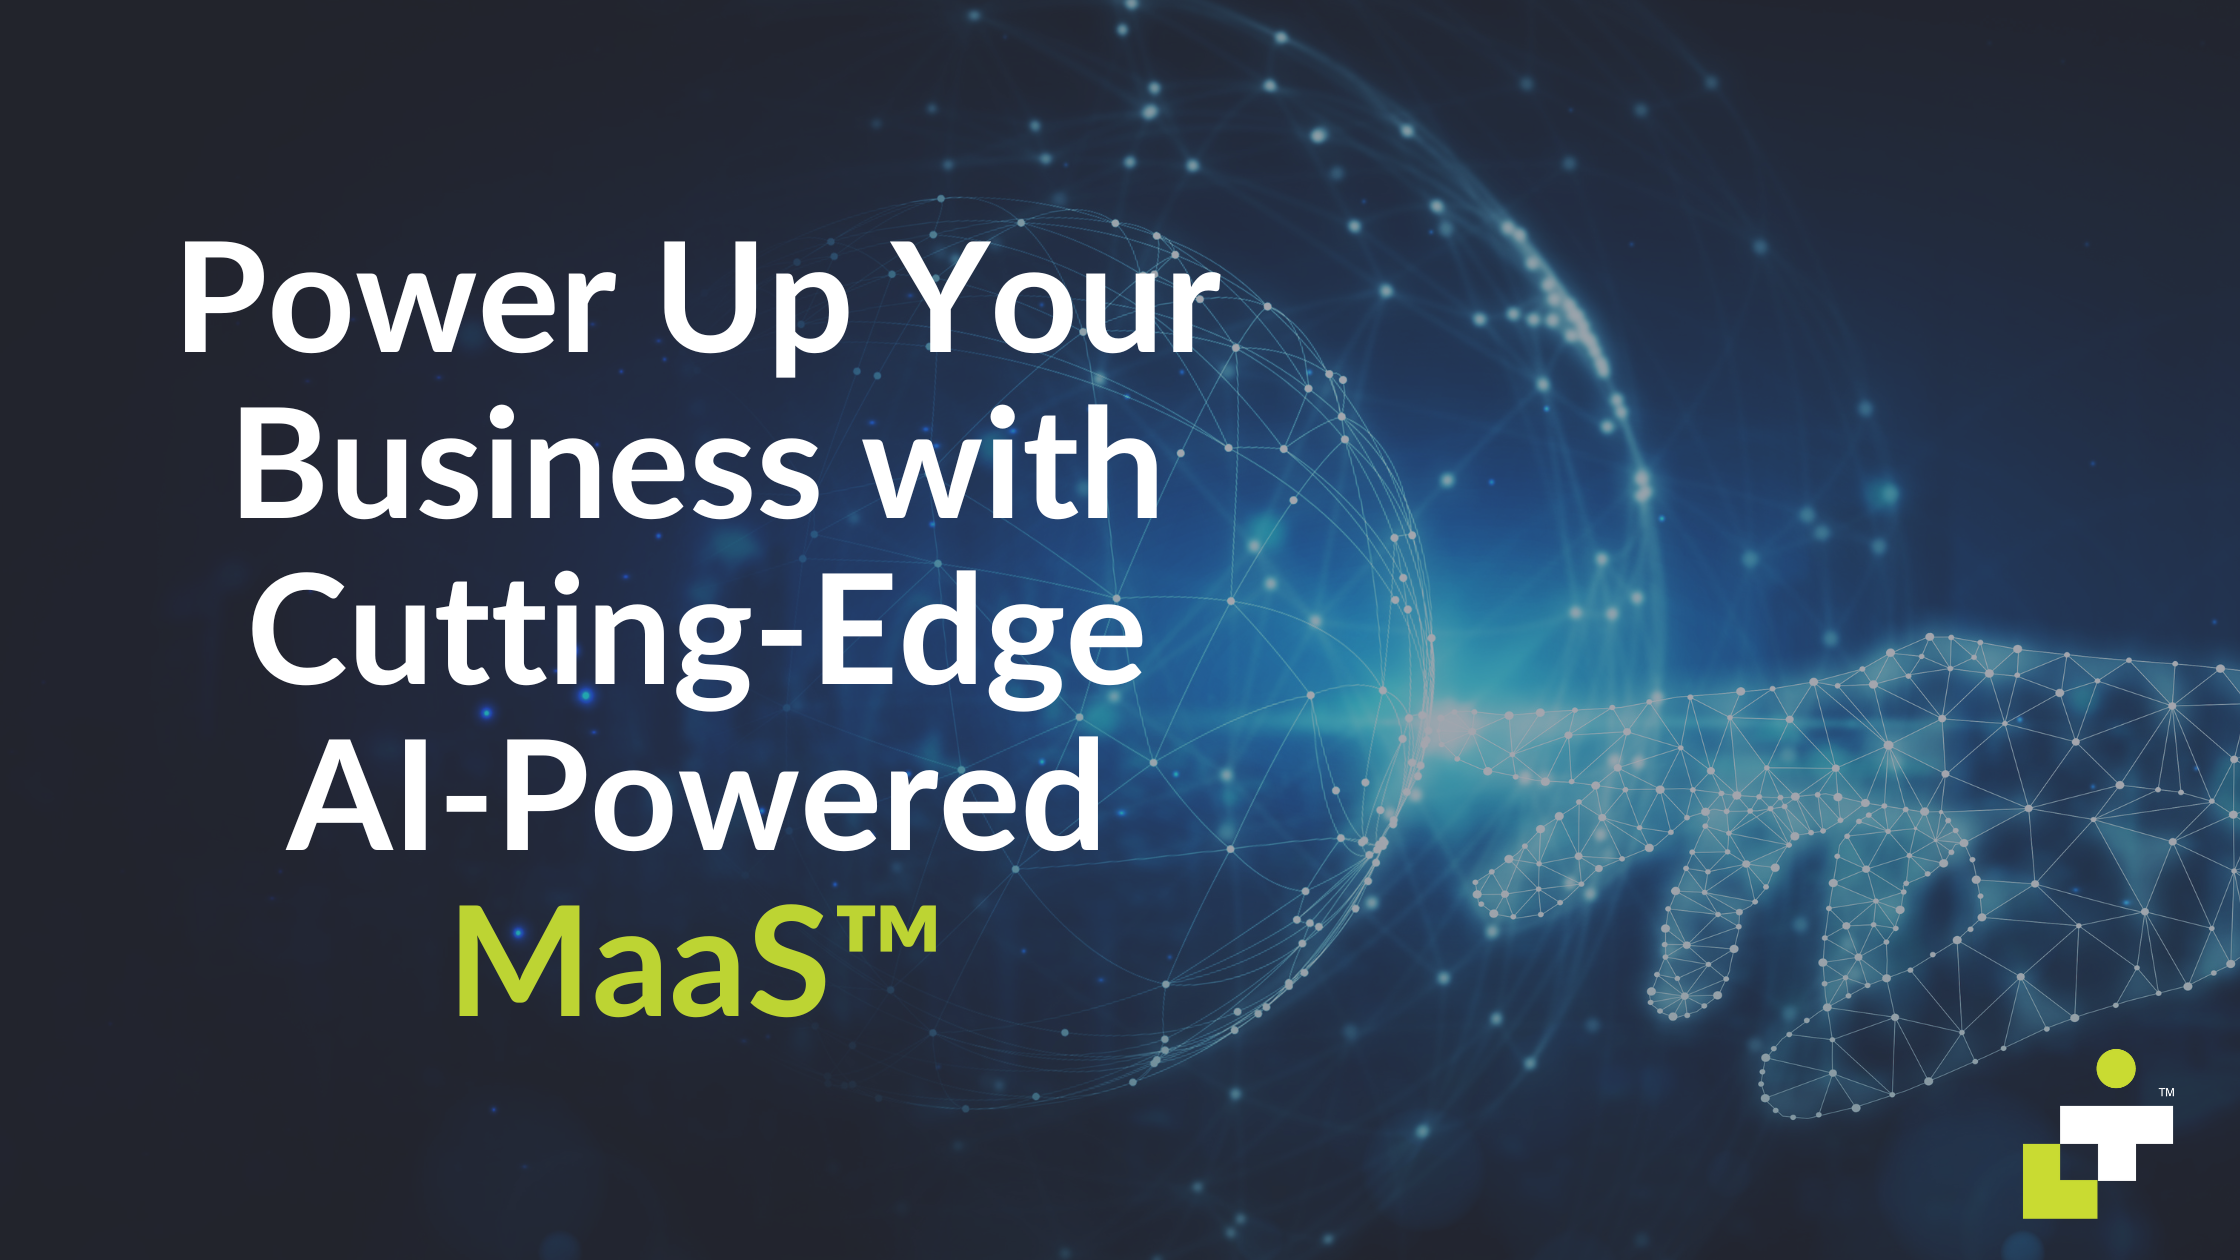 Power Up Your Business with Cutting-Edge AI-Powered Mortgage Automation, MaaS™️